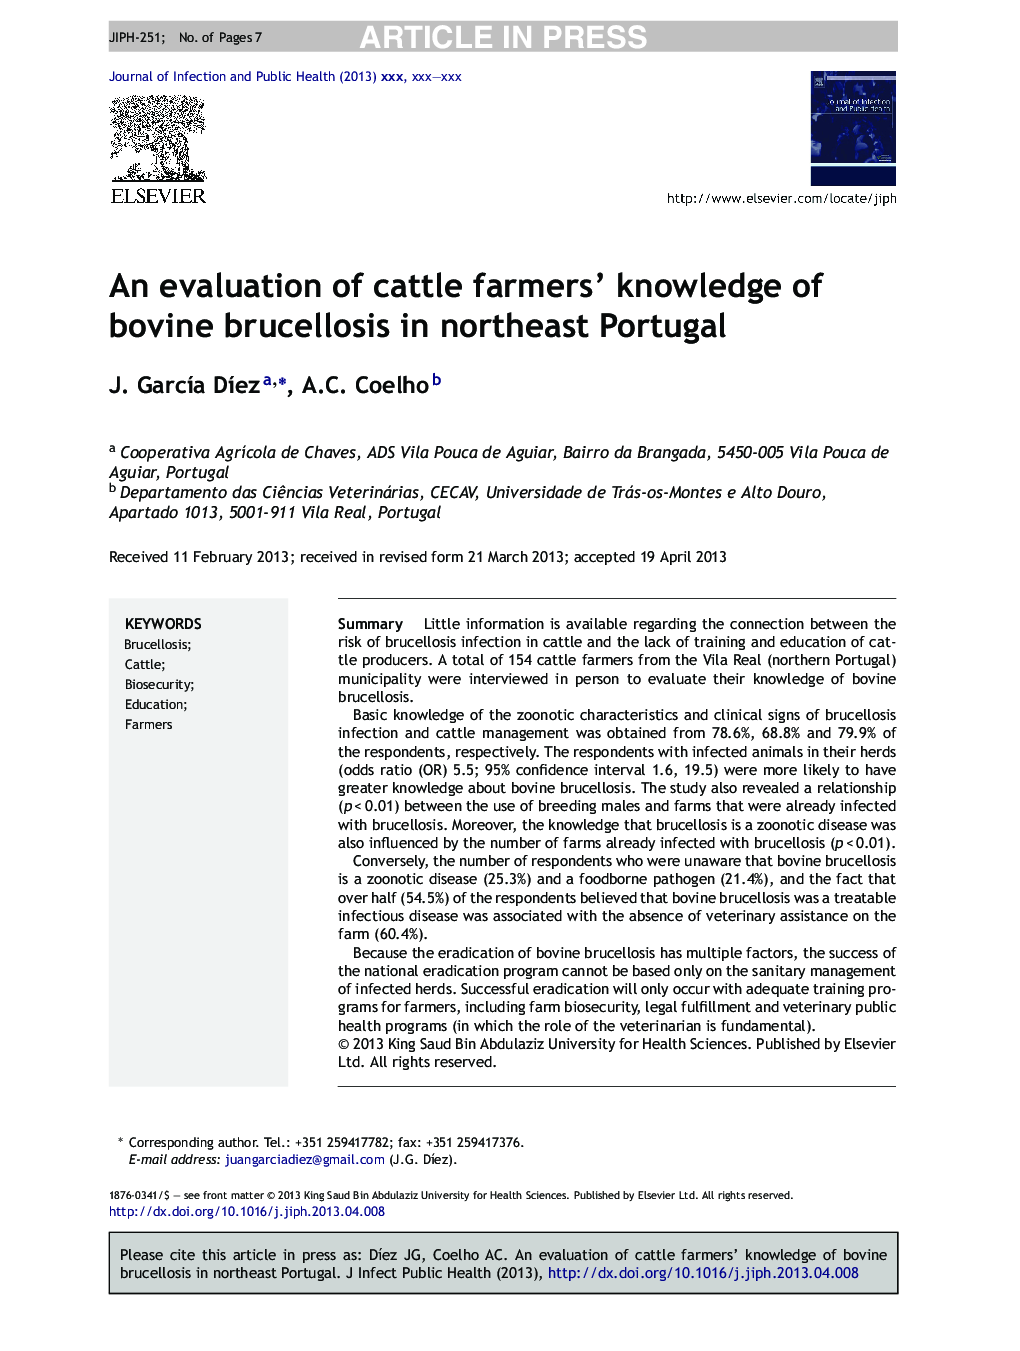 An evaluation of cattle farmers' knowledge of bovine brucellosis in northeast Portugal